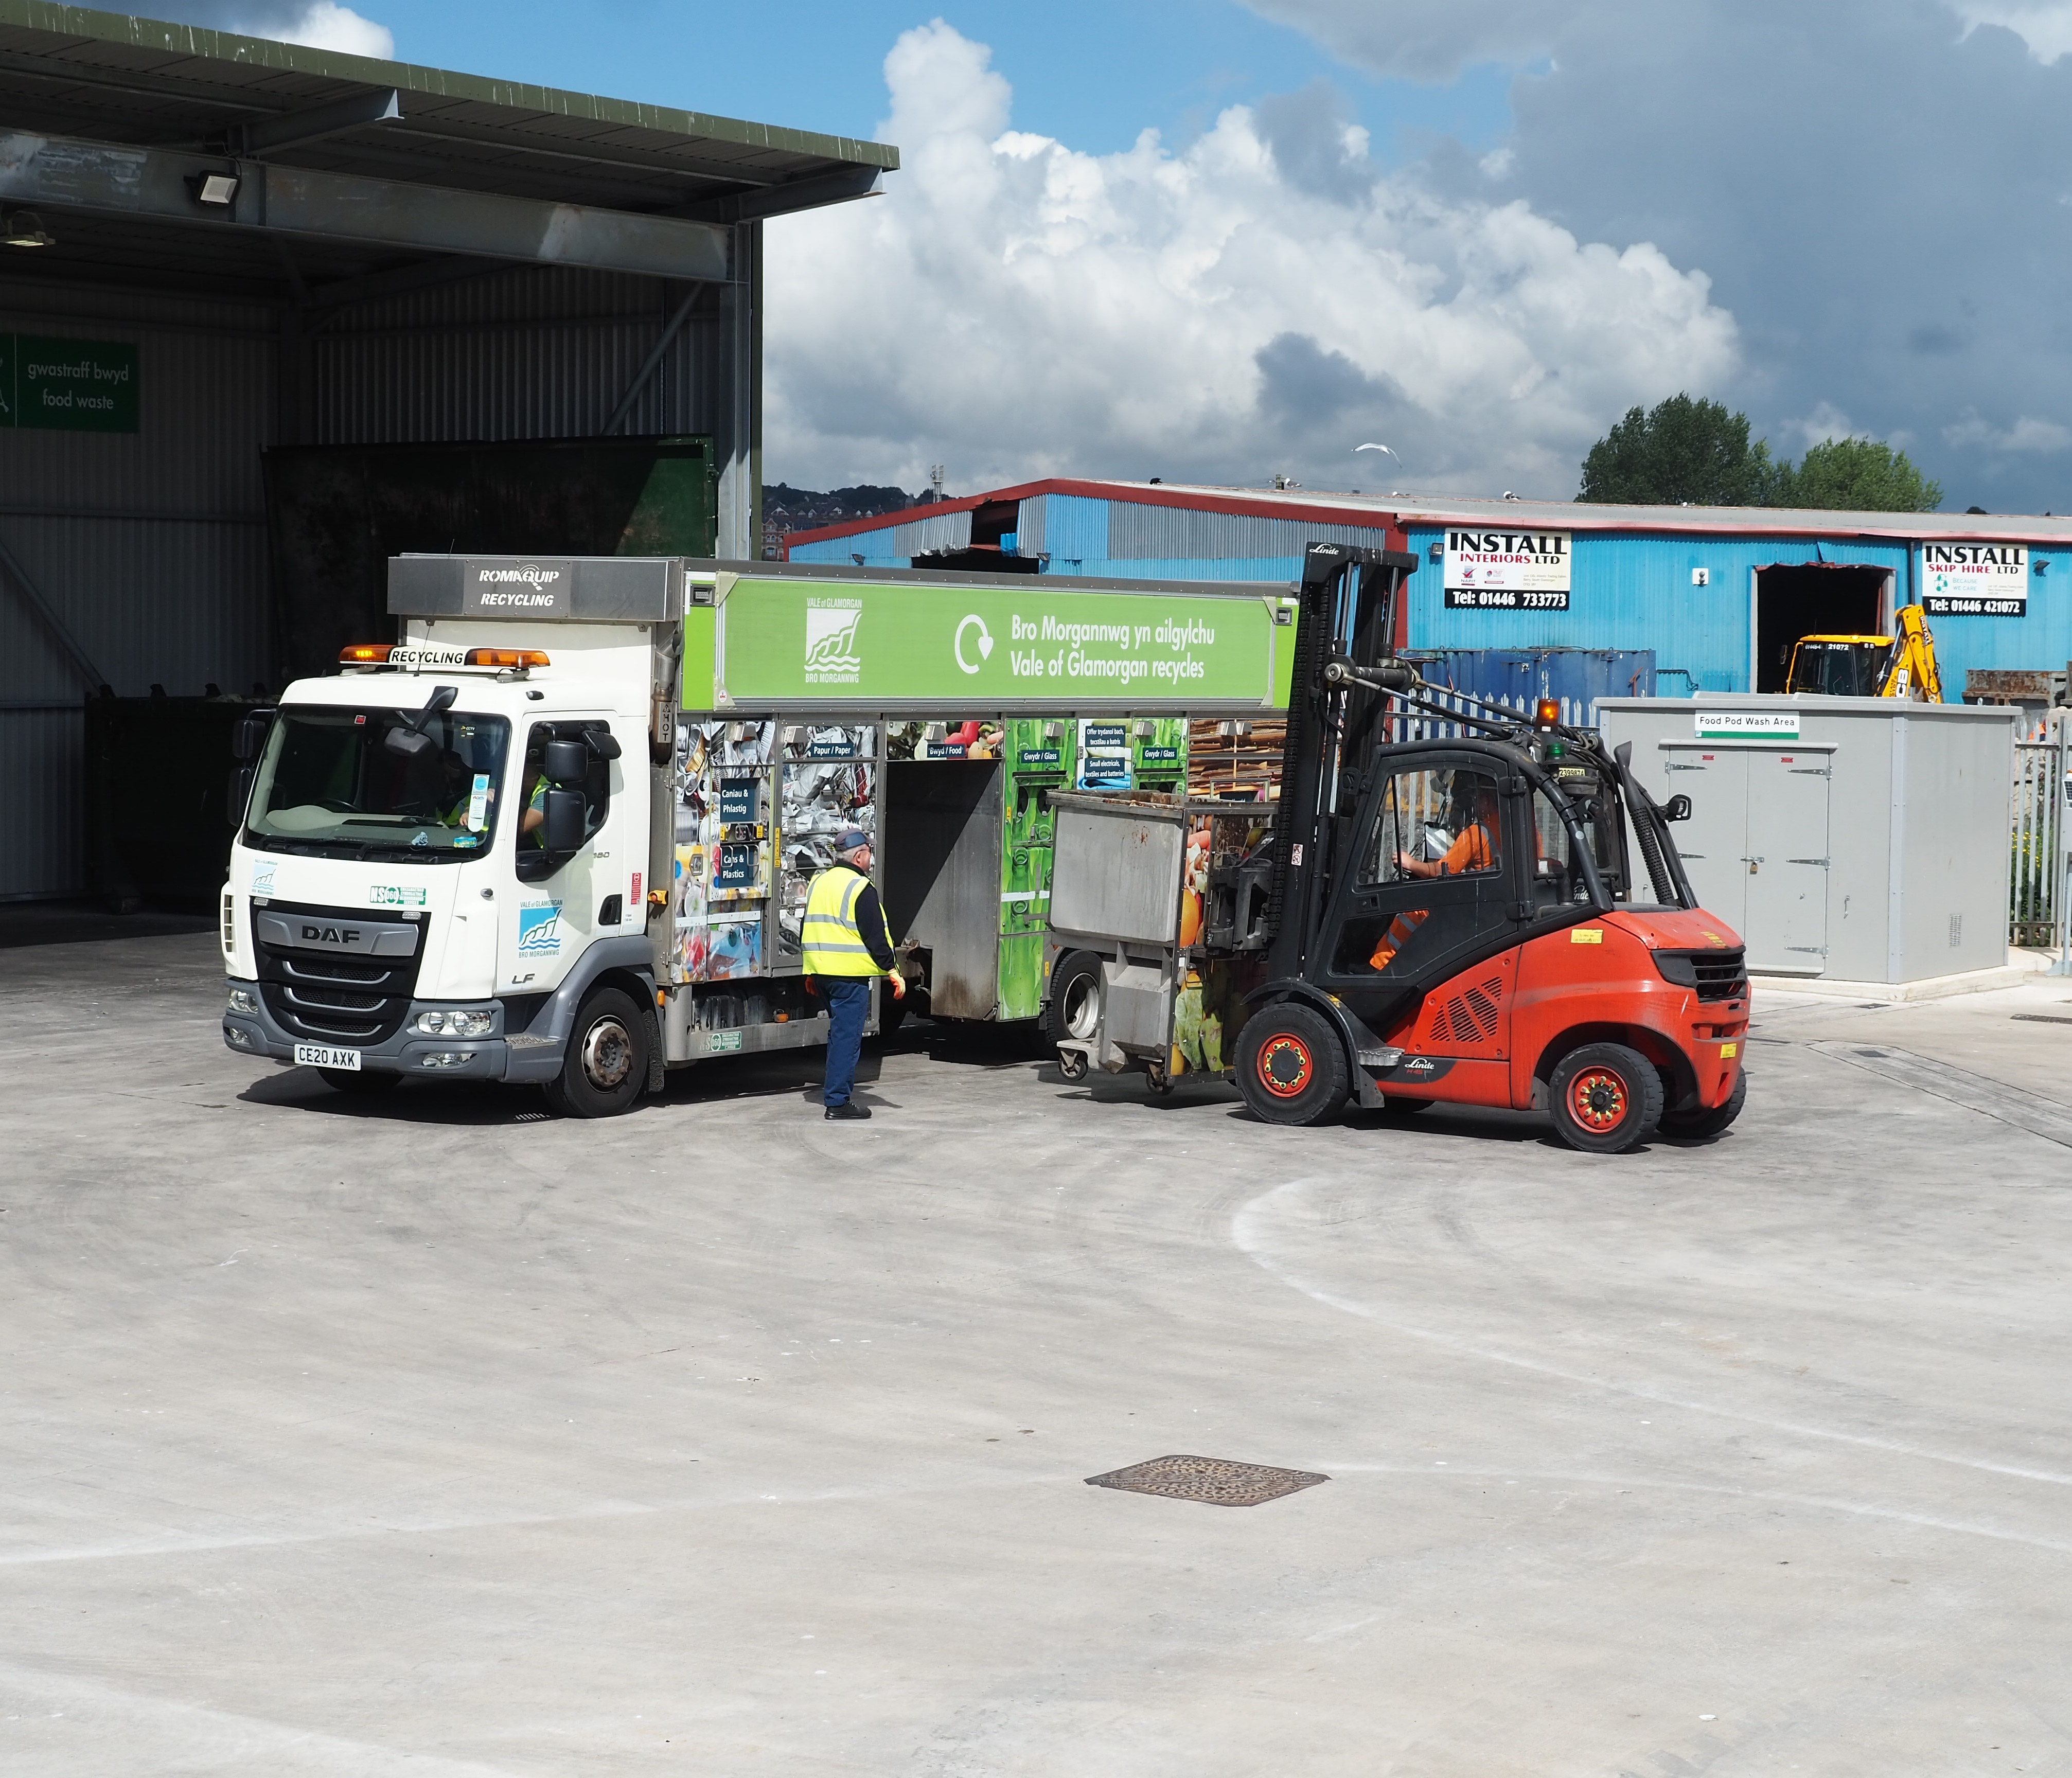 Commercial recycling vehicle and site